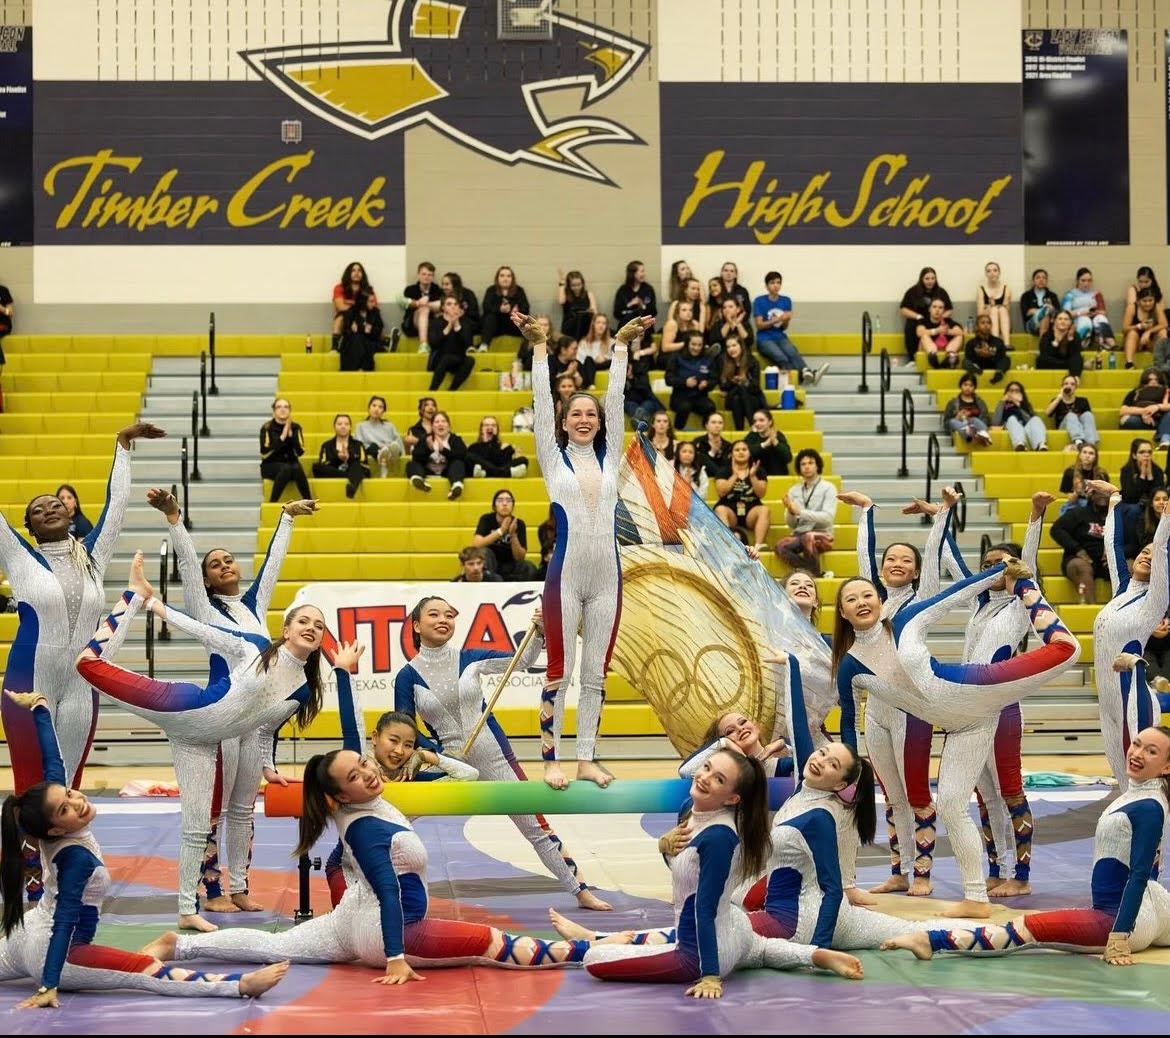 Emerson Varsity Guard members at the Timber Creek regional competition. 
Credit: @ehsfriscoguard on Instagram